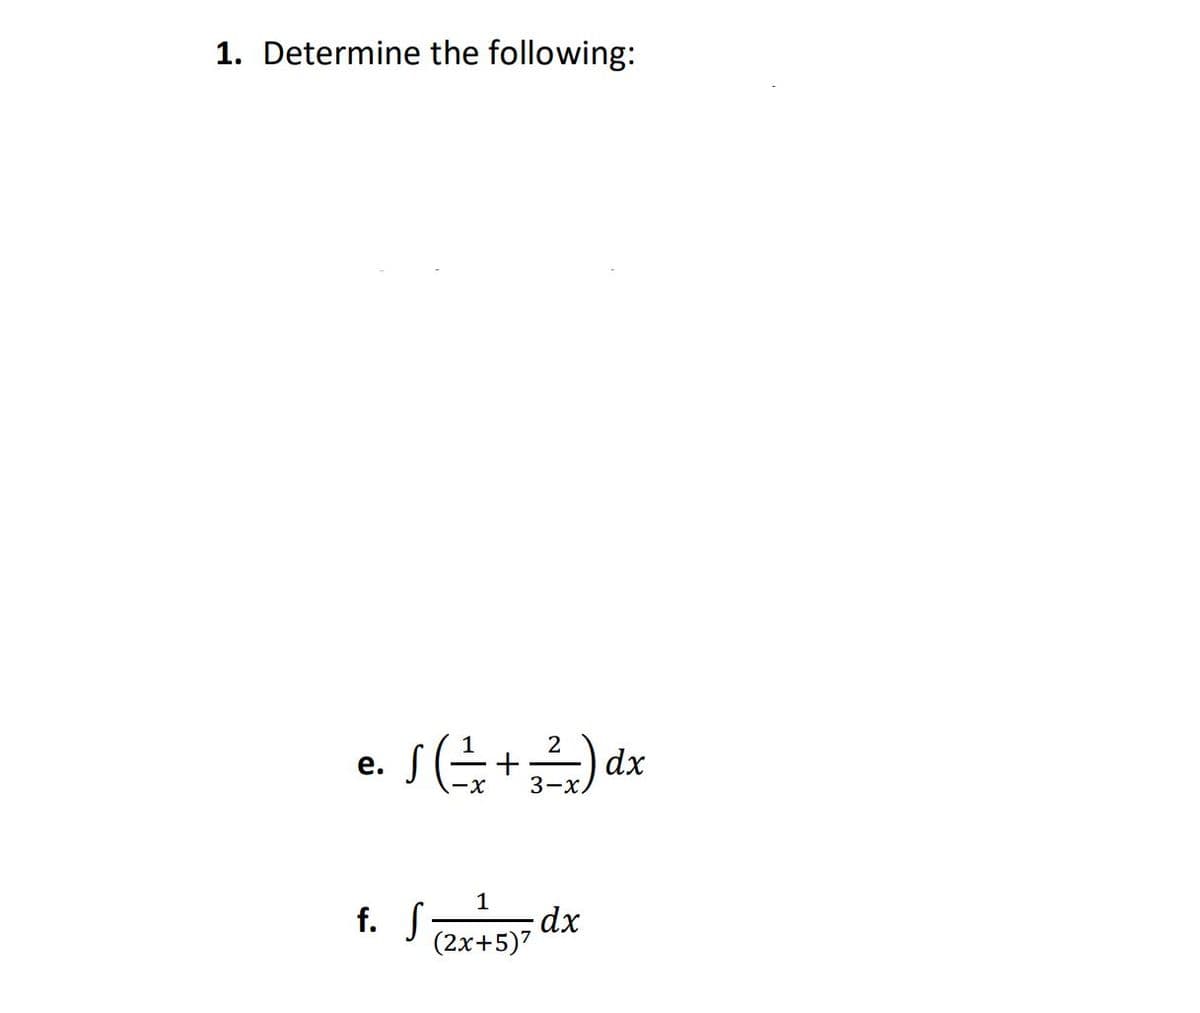 1. Determine the following:
2
dx
3-x.
е.
1
f. S
(2x+5)7
